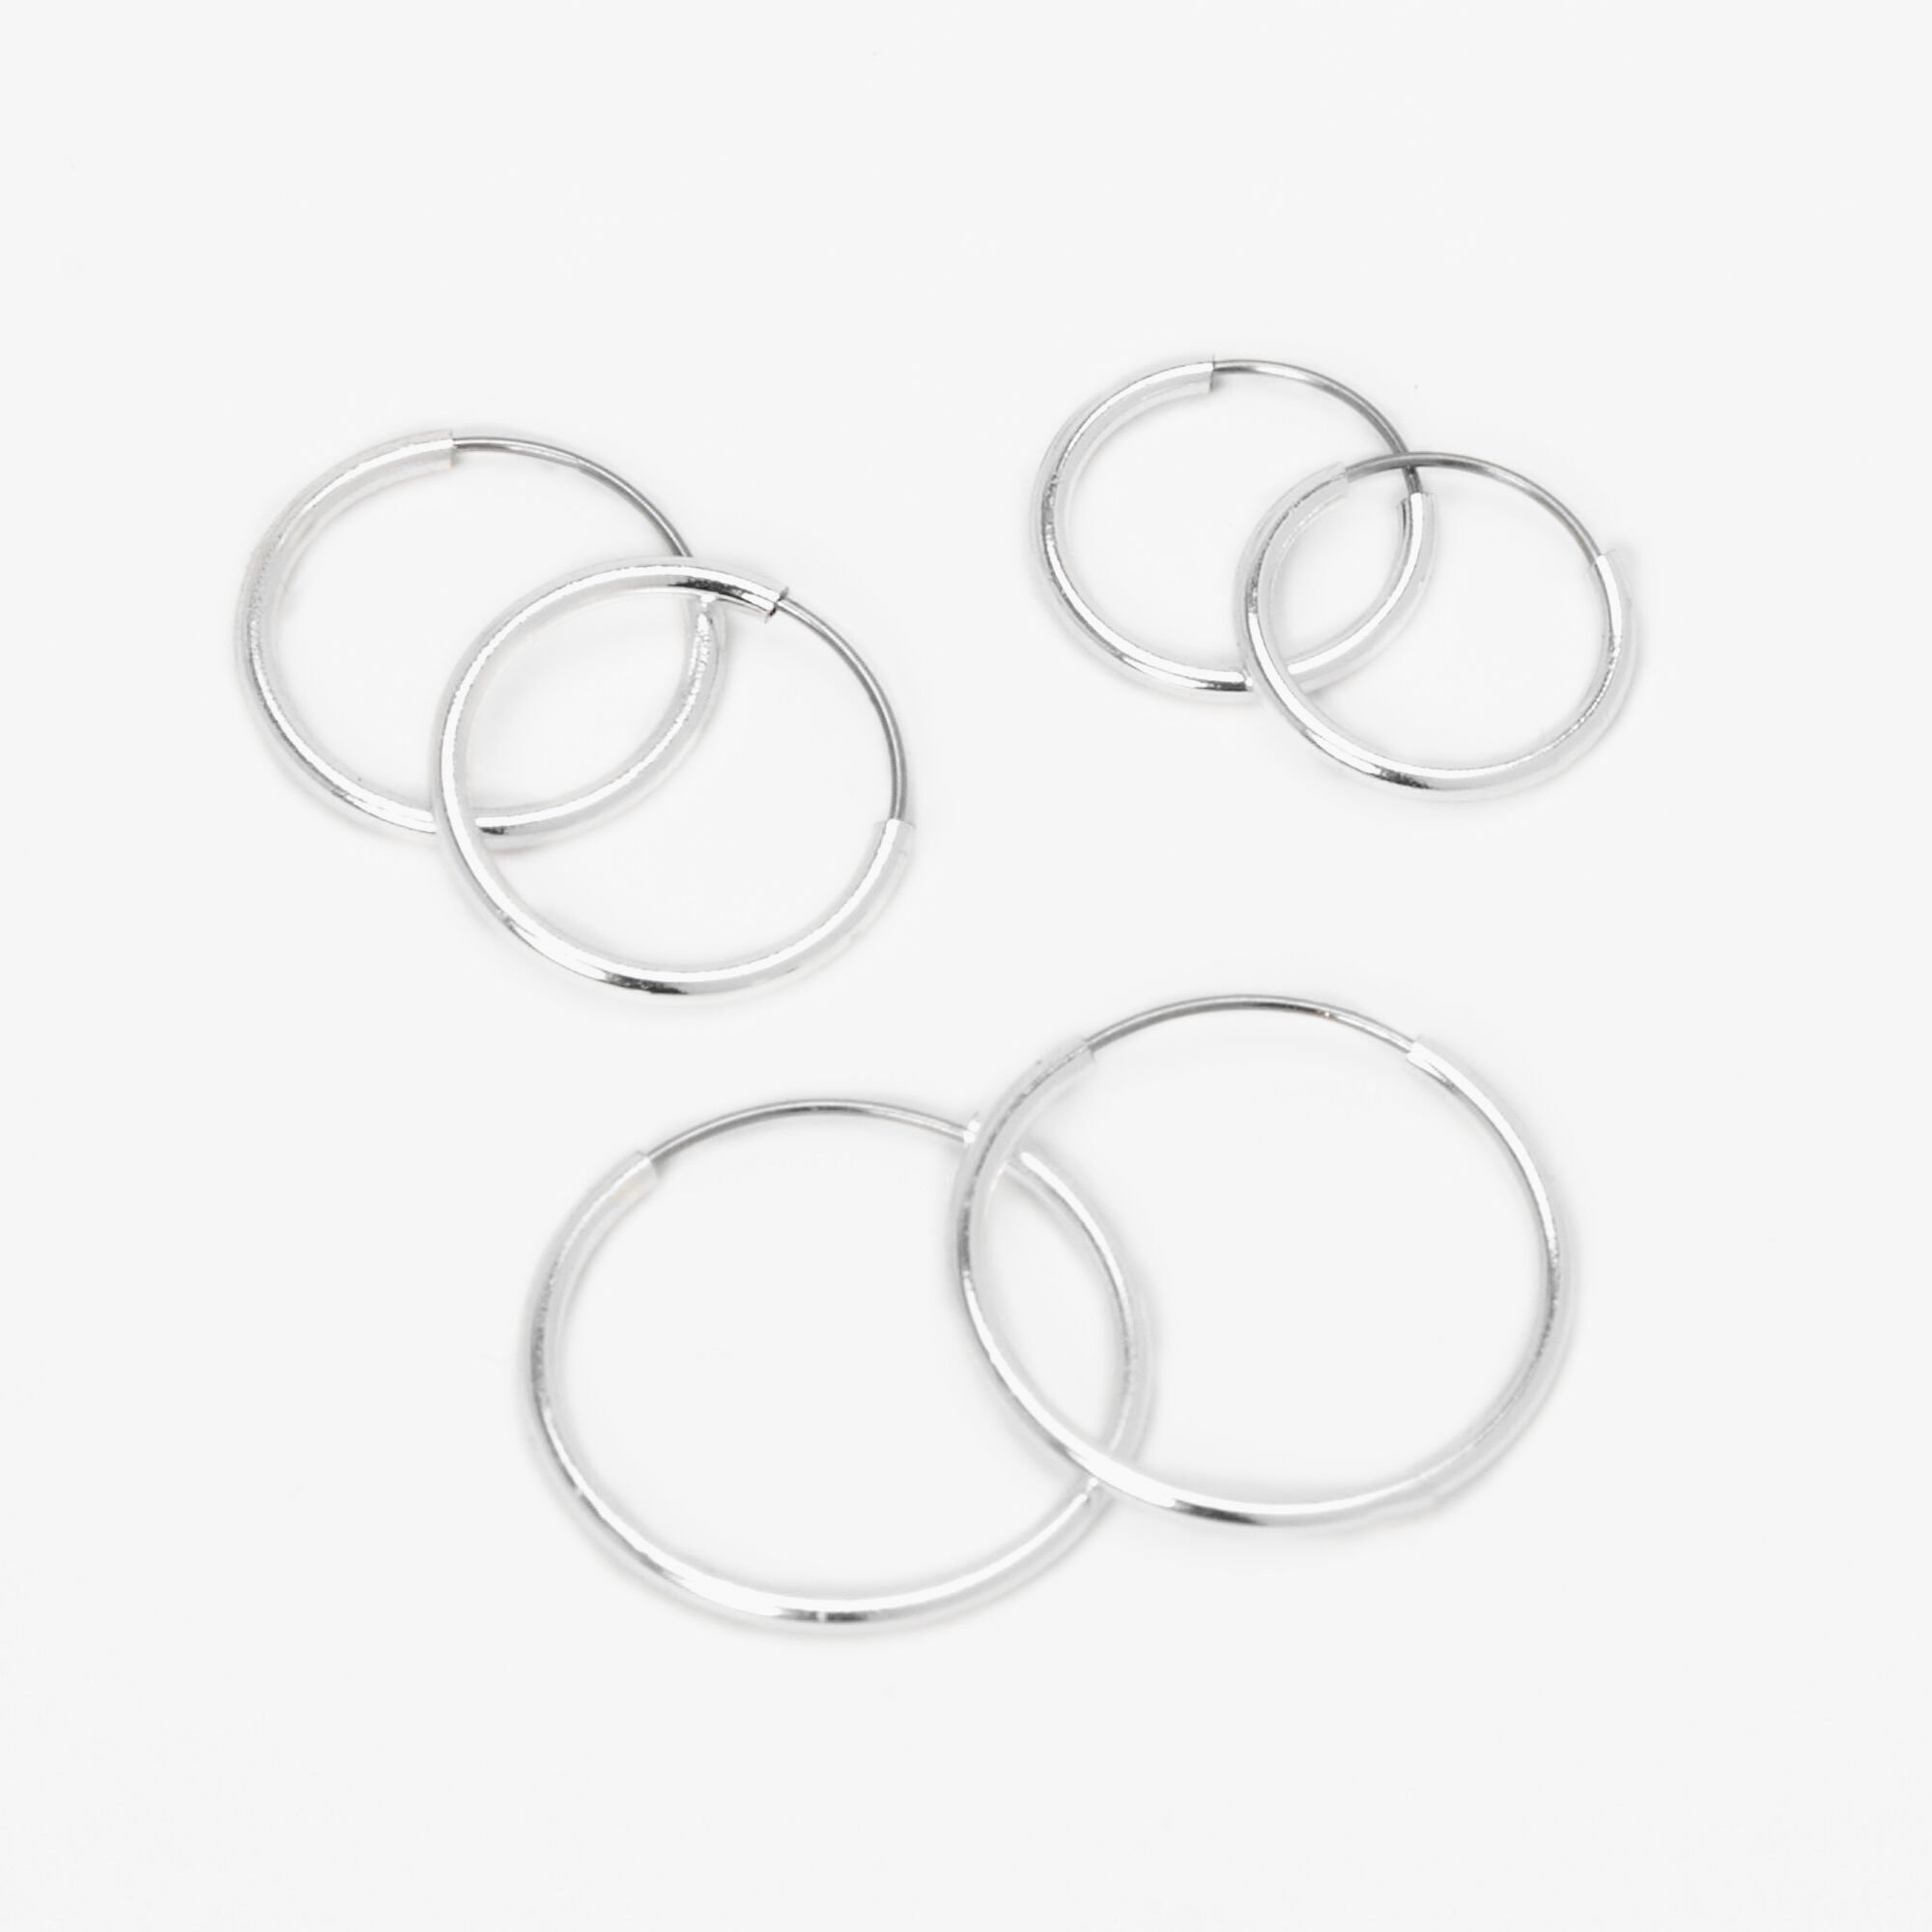 View Claires Graduated Hoop Earrings 3 Pack Silver information